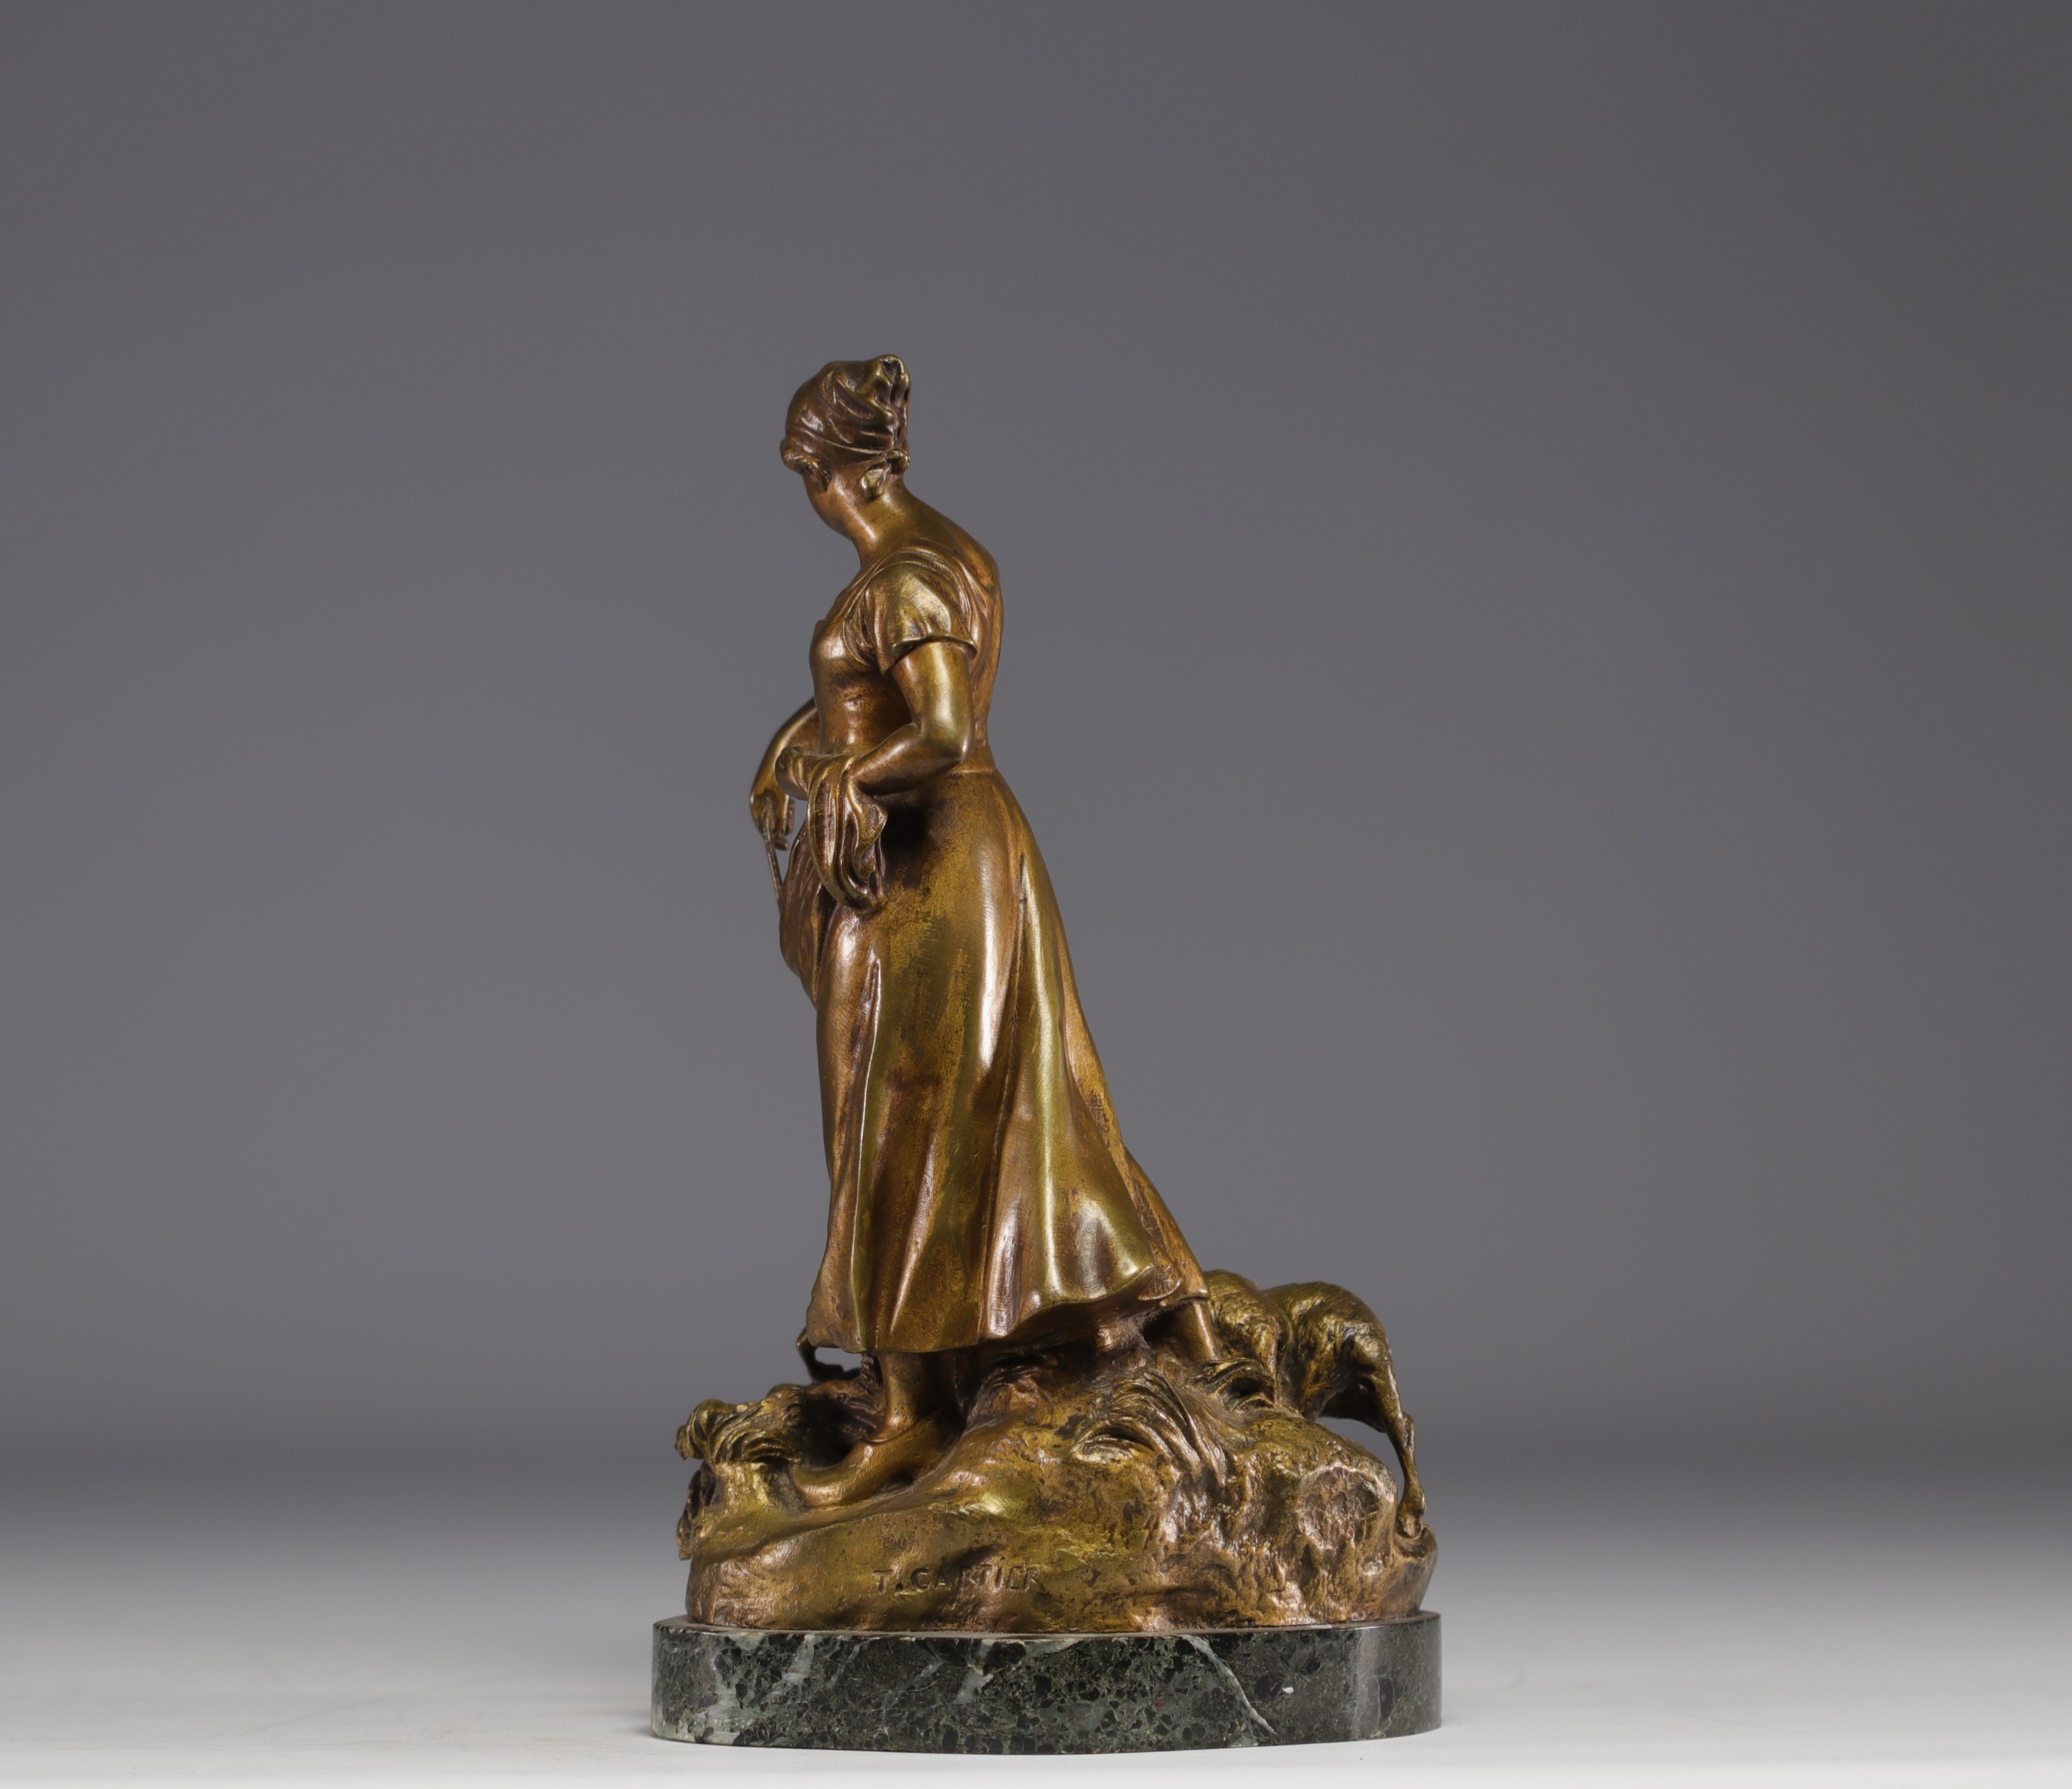 T. CARTIER (1879-1936) "The shepherdess and her sheep" bronze with golden patina. - Image 3 of 5